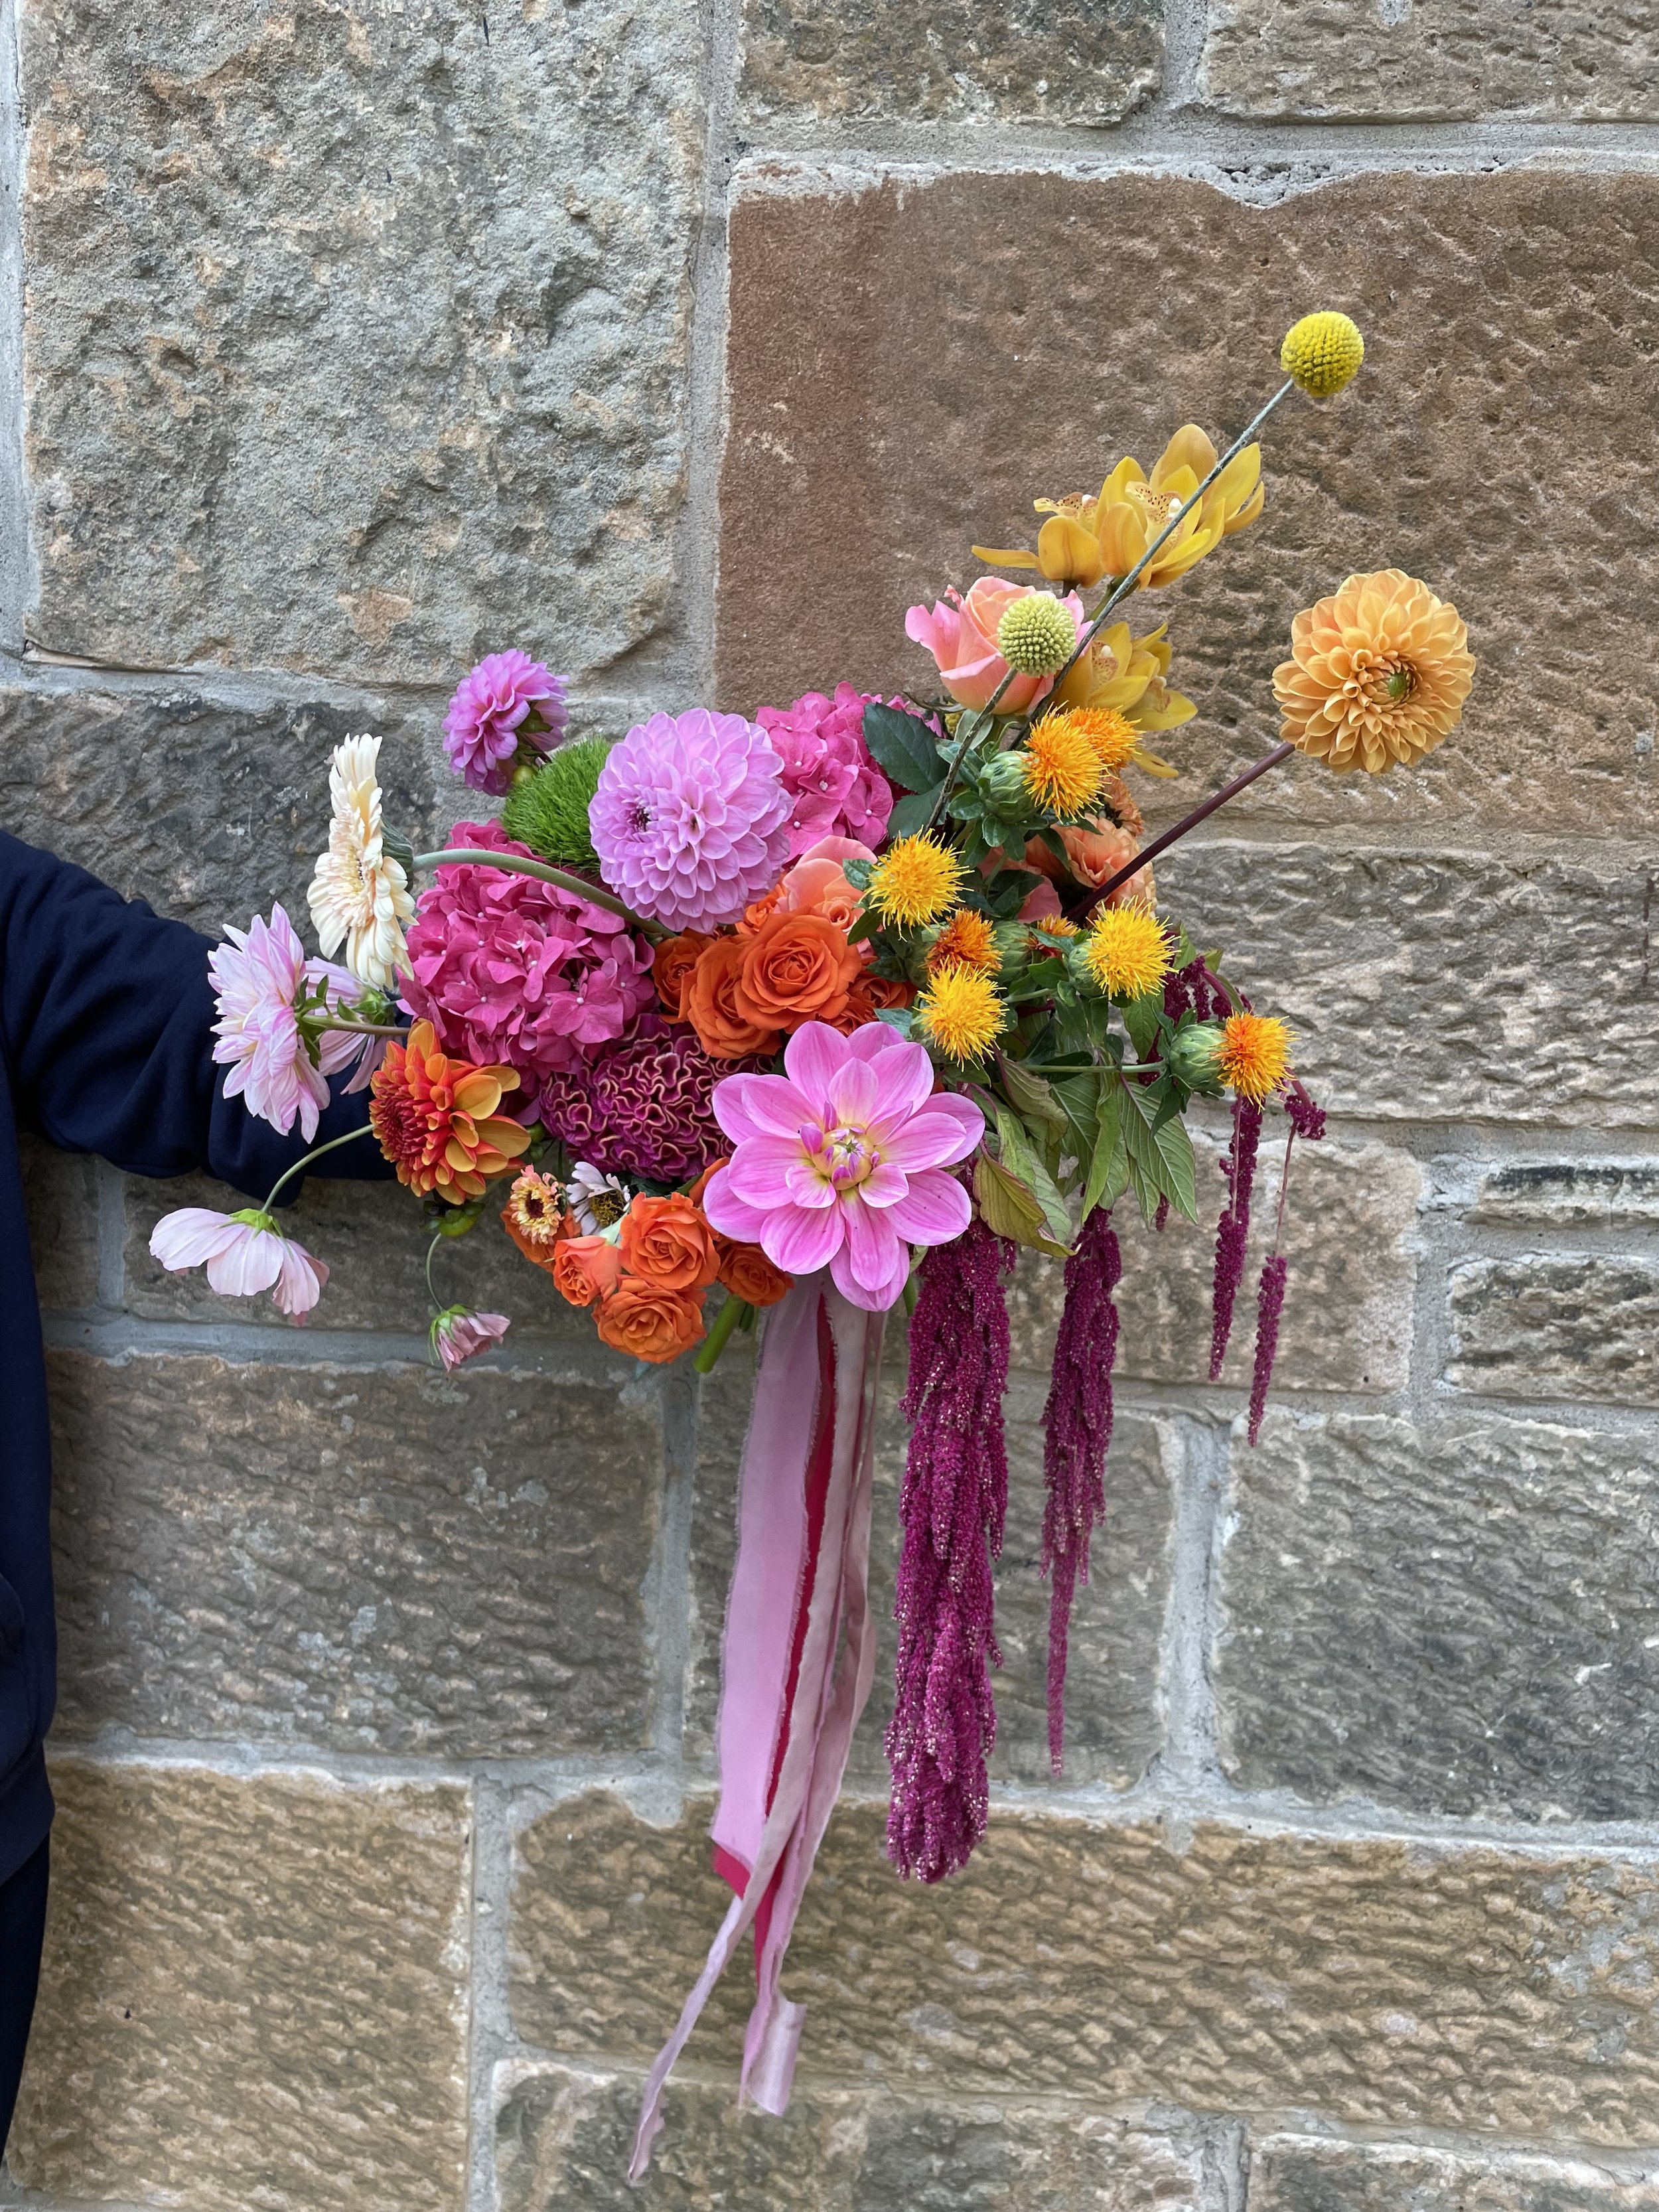  A bright modern wedding bouquet is being held in front of a stone wall. The different styles and textures of the blooms adds lots of fun and interest, as well as the ribbon it has been tied with along with the hanging florals. 